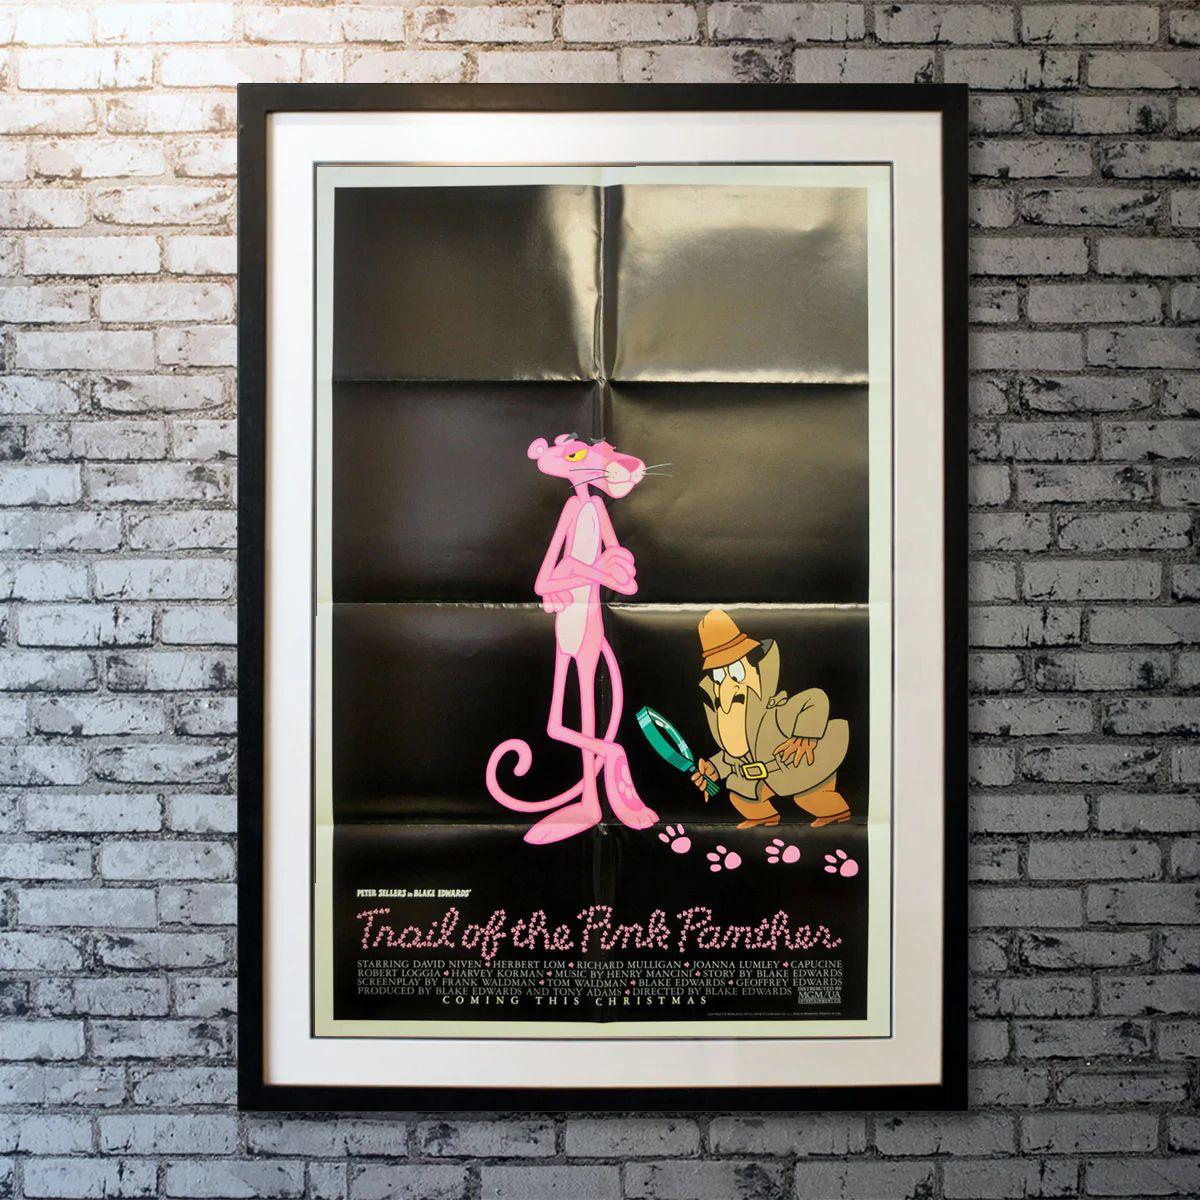 Trail Of The Pink Panther, Unframed Poster, 1982

Original Advance One Sheet (27 X 41 Inches). This sequel finds Chief Inspector Clouseau (Peter Sellers) being summoned to the country of Lugash to investigate another robbery of the eponymous